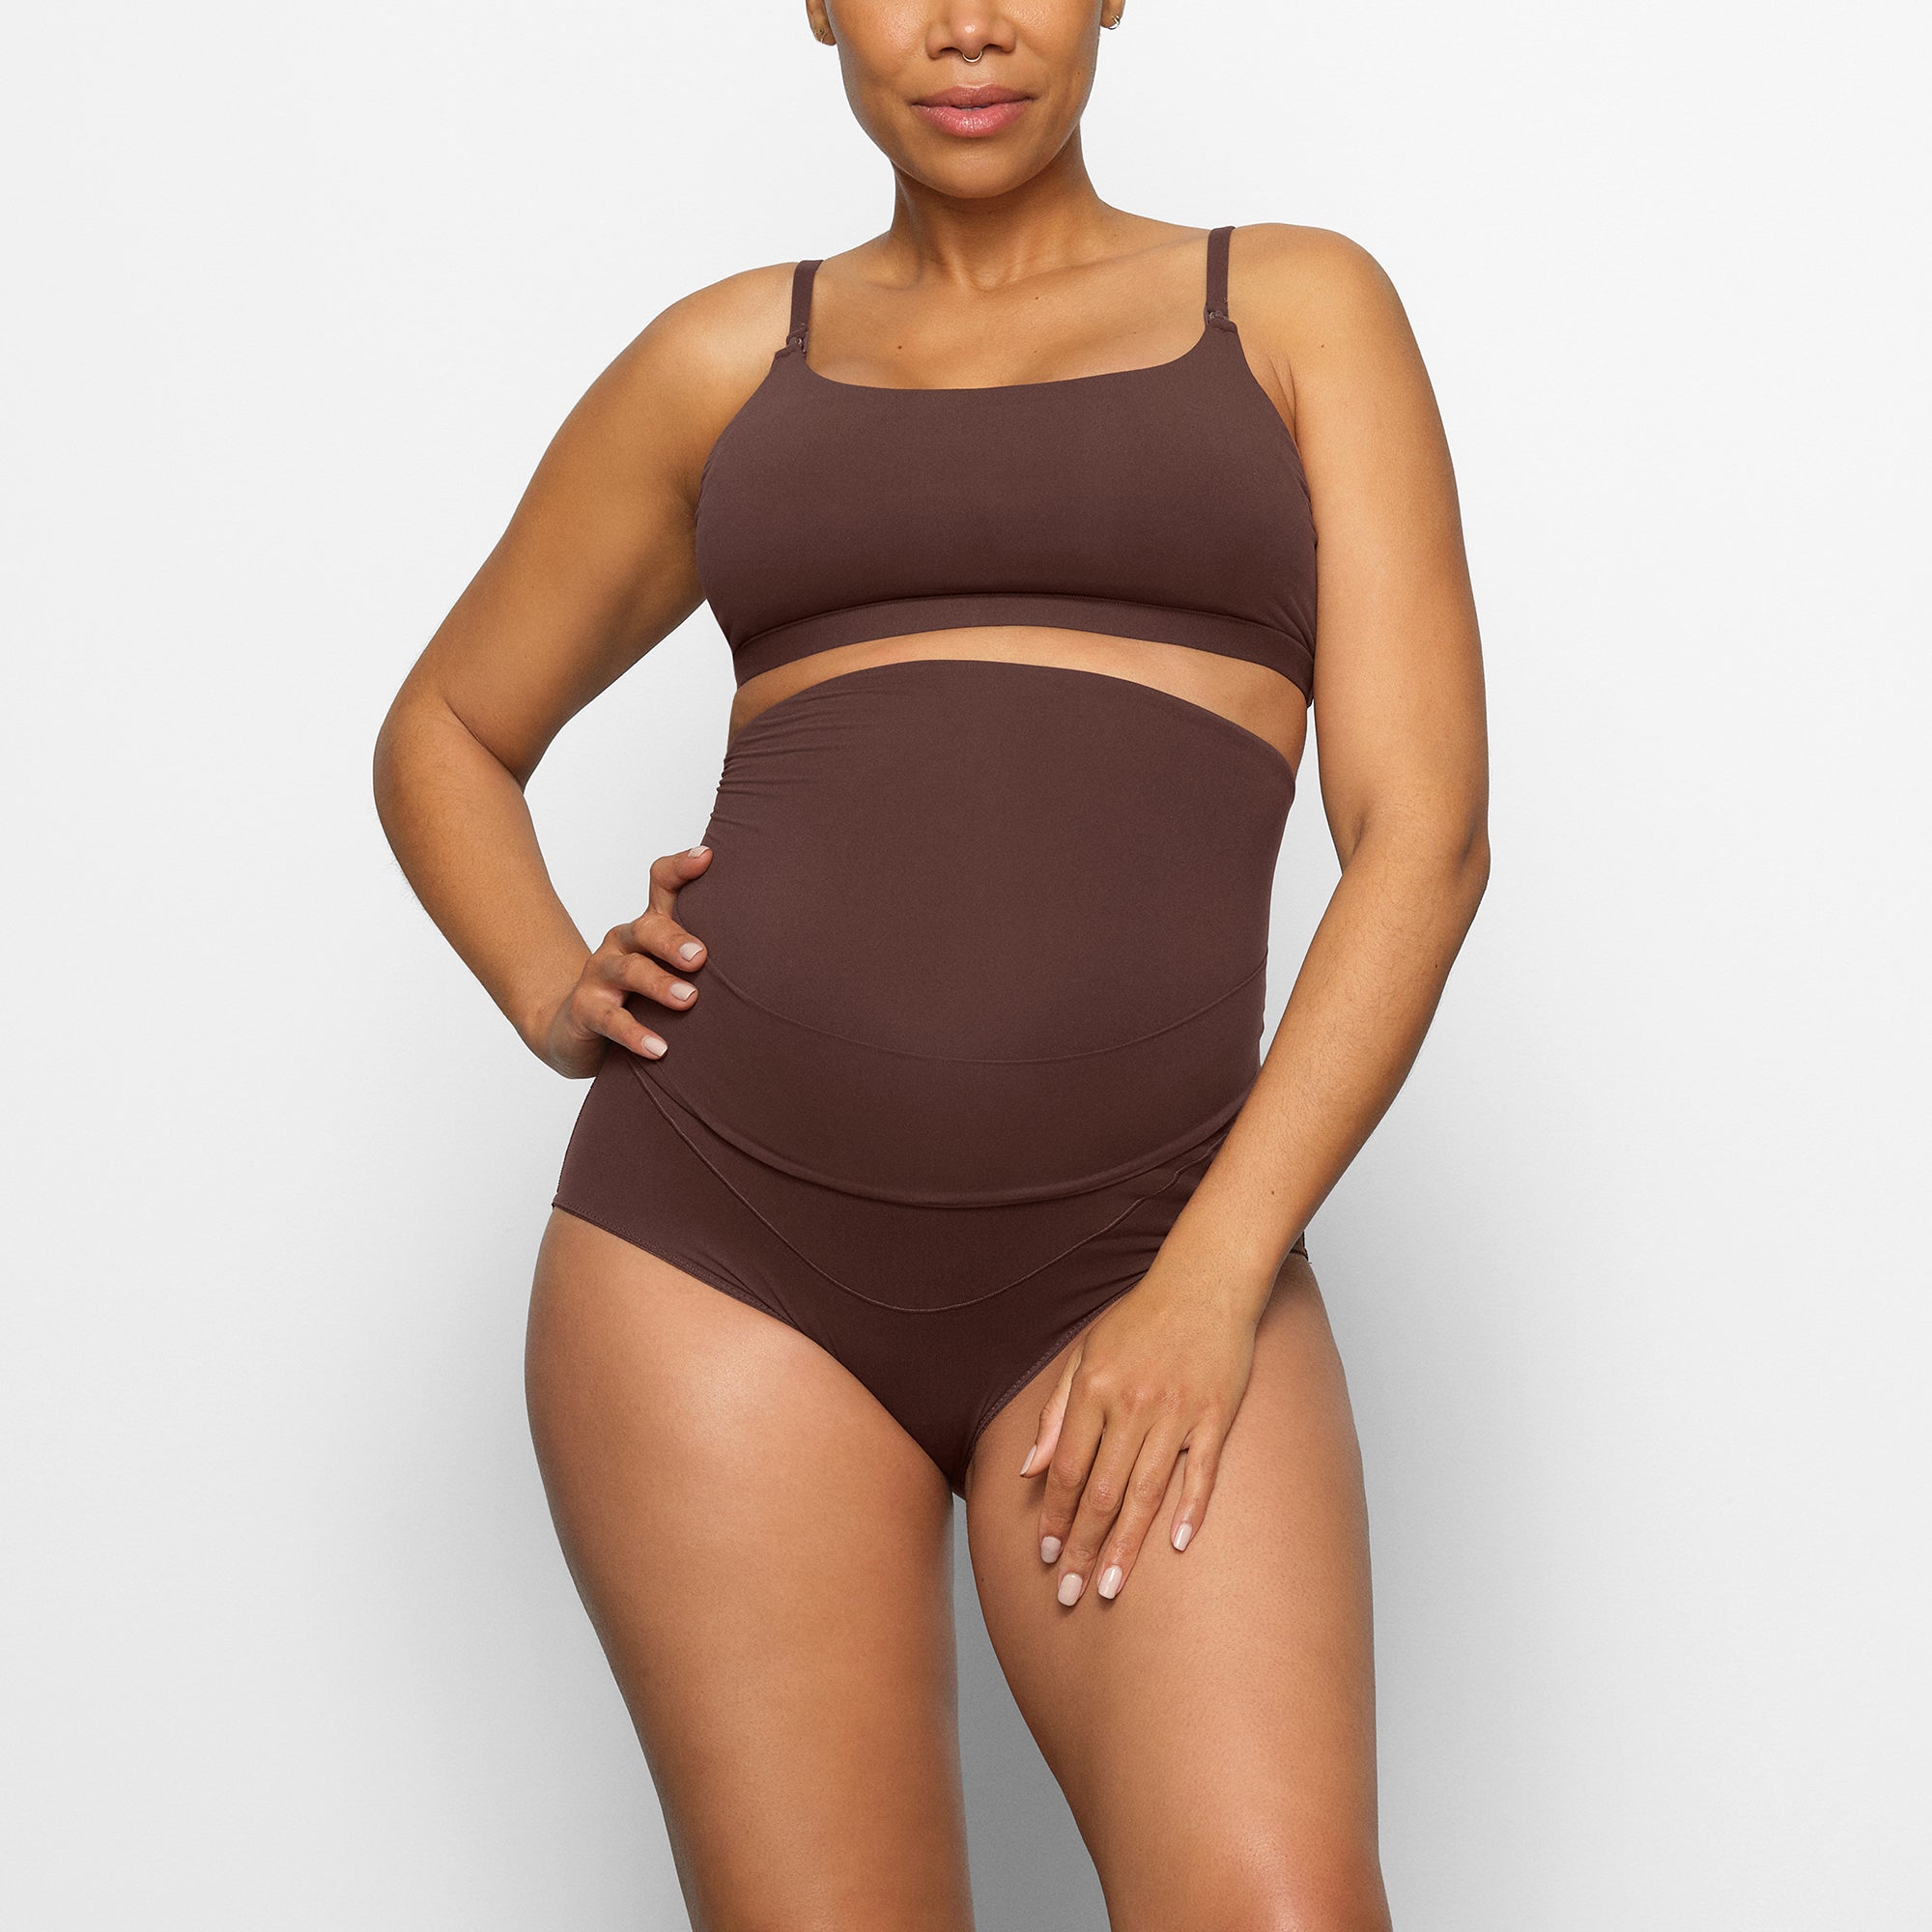 SKIMS - JUST DROPPED: NEW FITS EVERYBODY. New maternity